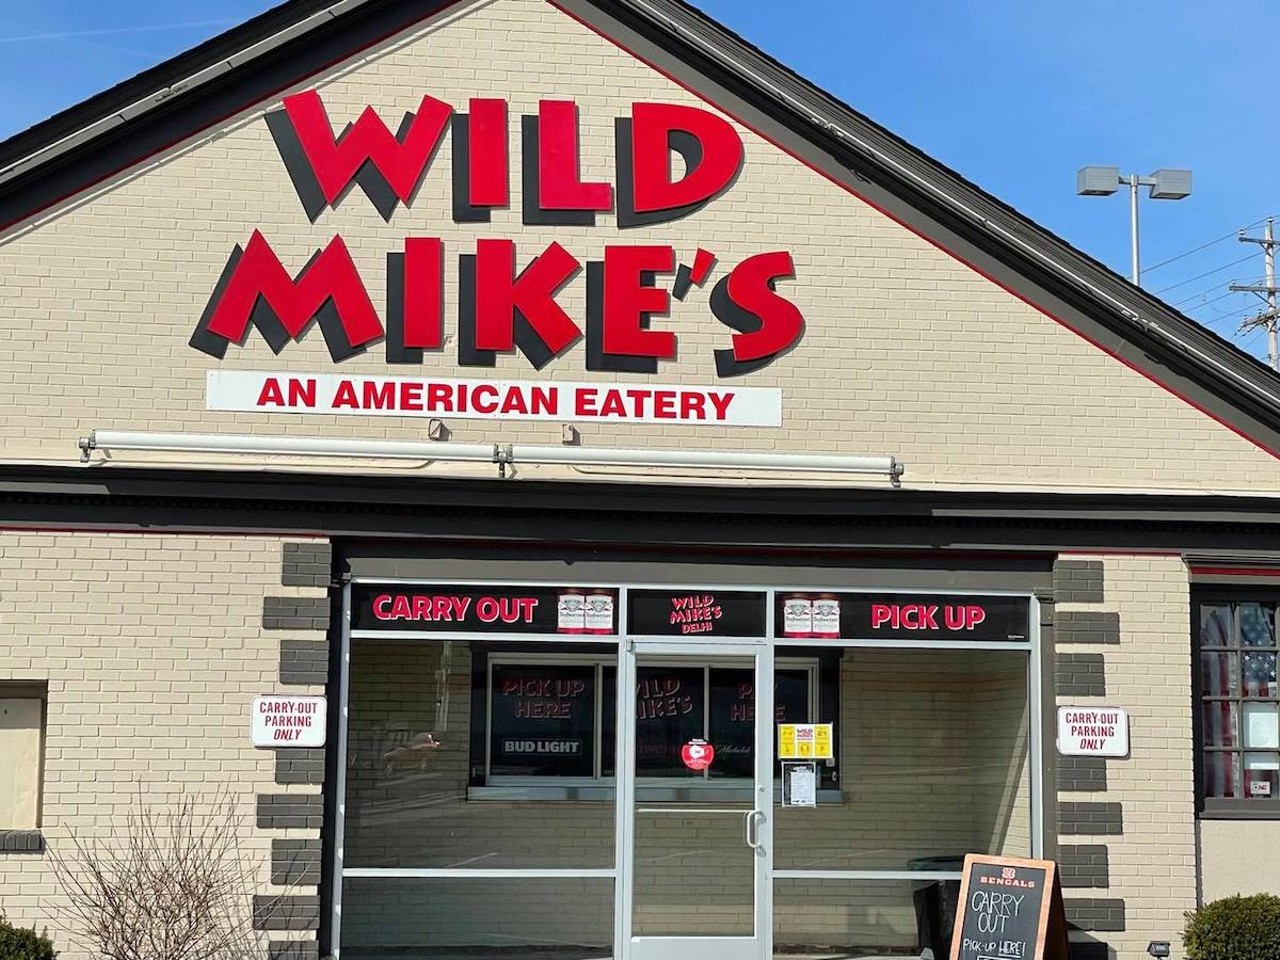 Wild Mike’s
5043 Delhi Pike, Delhi; 4498 Harrison Ave., Green Township; 7587 Bridgetown Road, Miami Heights
This West Side chain’s three locations boast a full menu with lots of tasty dishes, but Mike’s raved-about signature wings are always a great option. The wing ordering process is threefold: choose boneless or traditional, flavor and temperature. Can’t decide on one flavor? Try Mike’s Mix for a unique blend of them all.